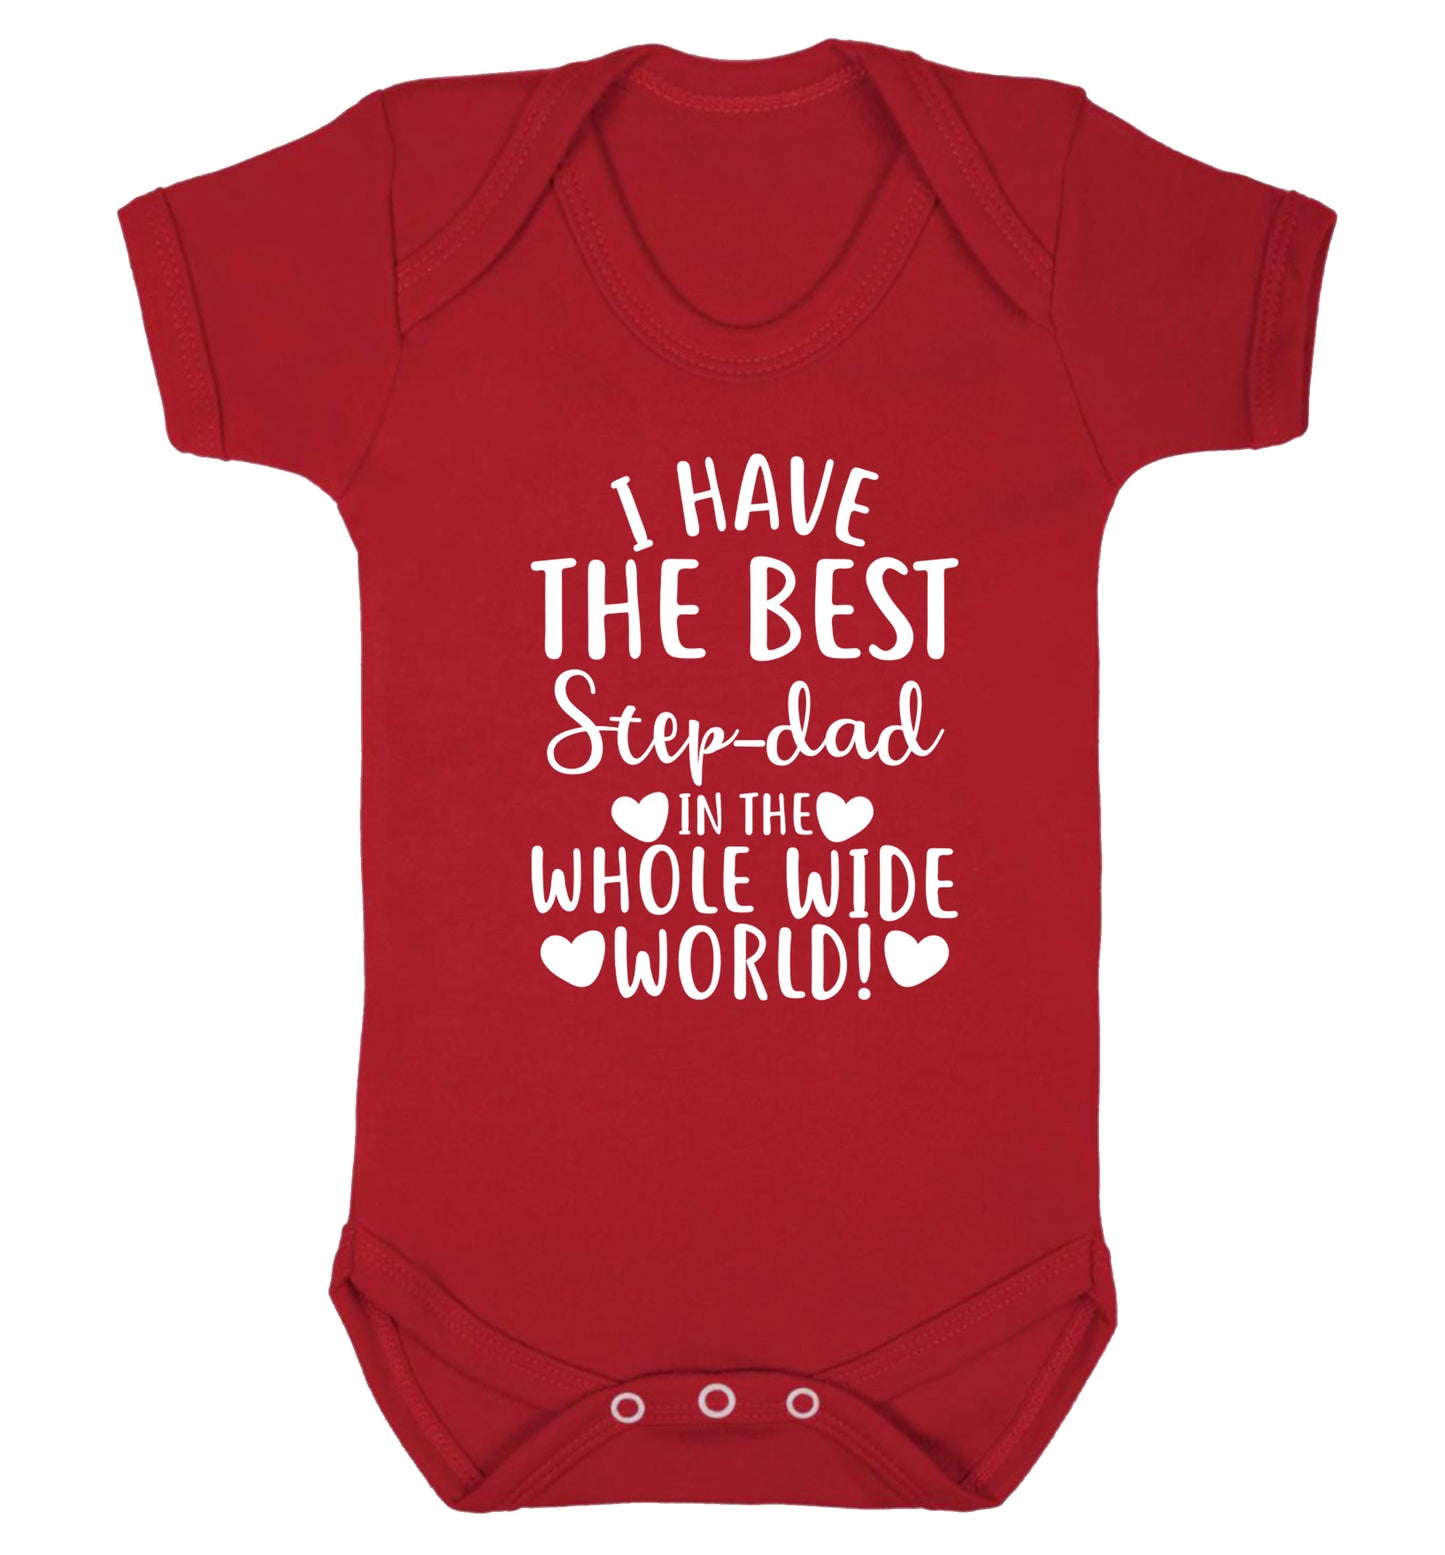 I have the best step-dad in the whole wide world! Baby Vest red 18-24 months